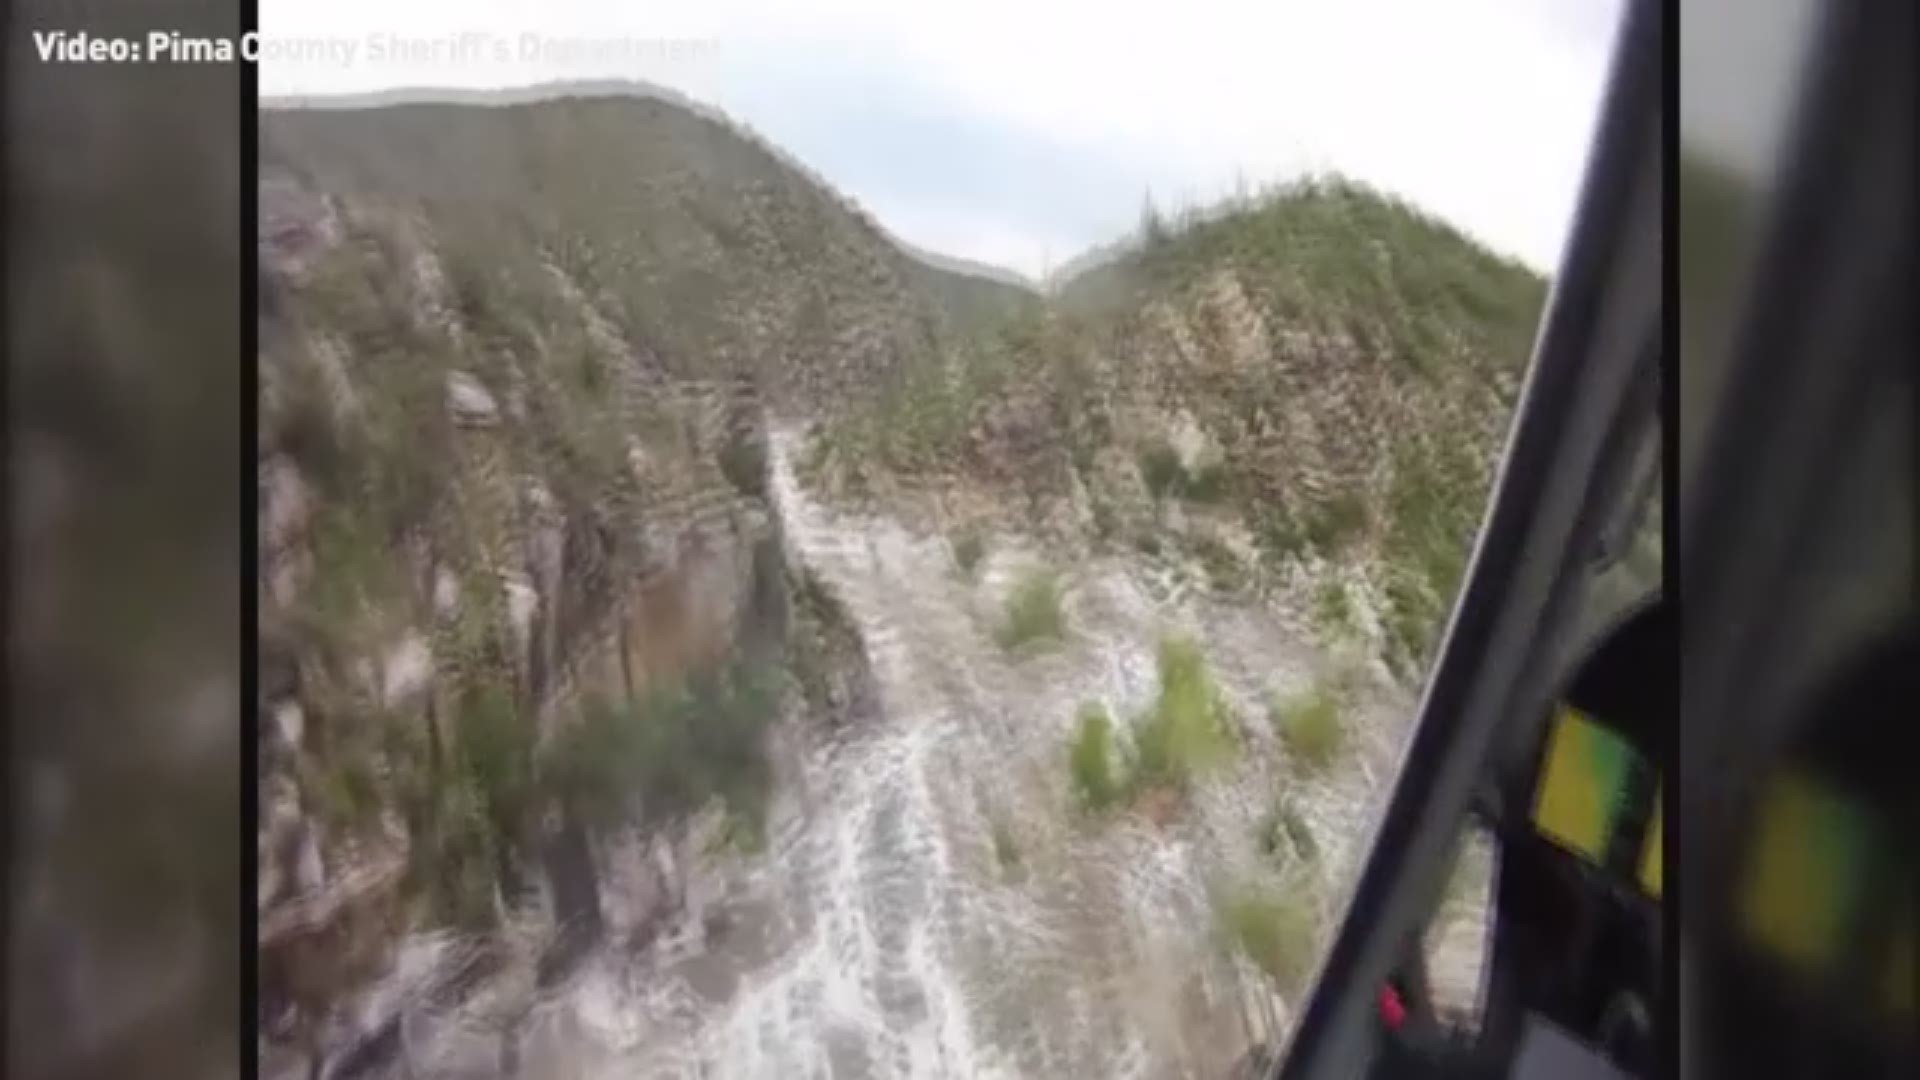 Video from the Pima County Sheriff's Department shows a father and child being airlifted from rushing waters after a flash flood stranded 17 hikers in the Tanque Verde Falls area of Redington Pass.